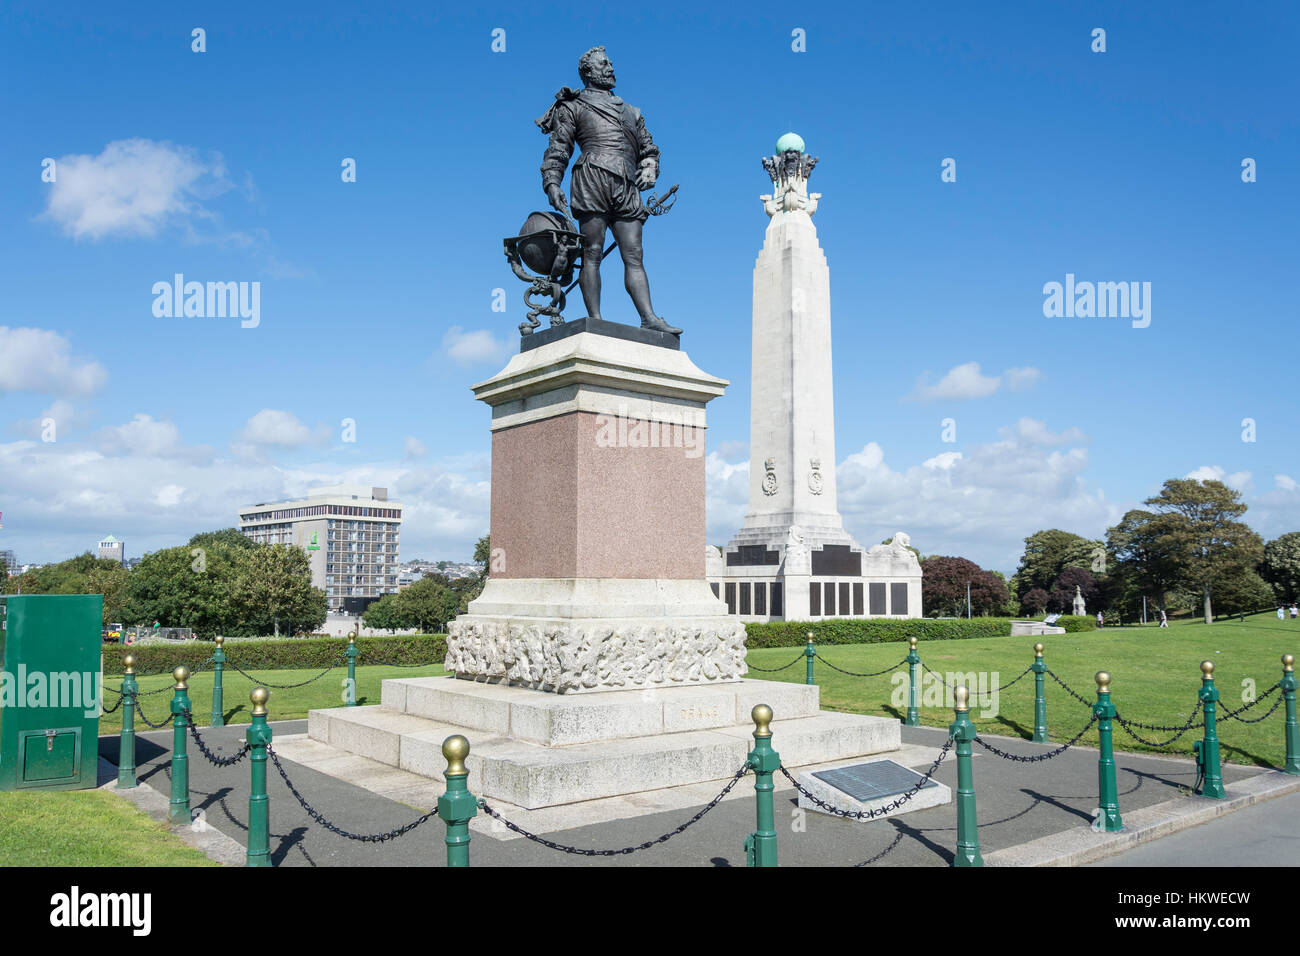 Statue de Sir Francis Drake et Royal Naval War Memorial, Plymouth Hoe, Plymouth, Devon, Angleterre, Royaume-Uni Banque D'Images